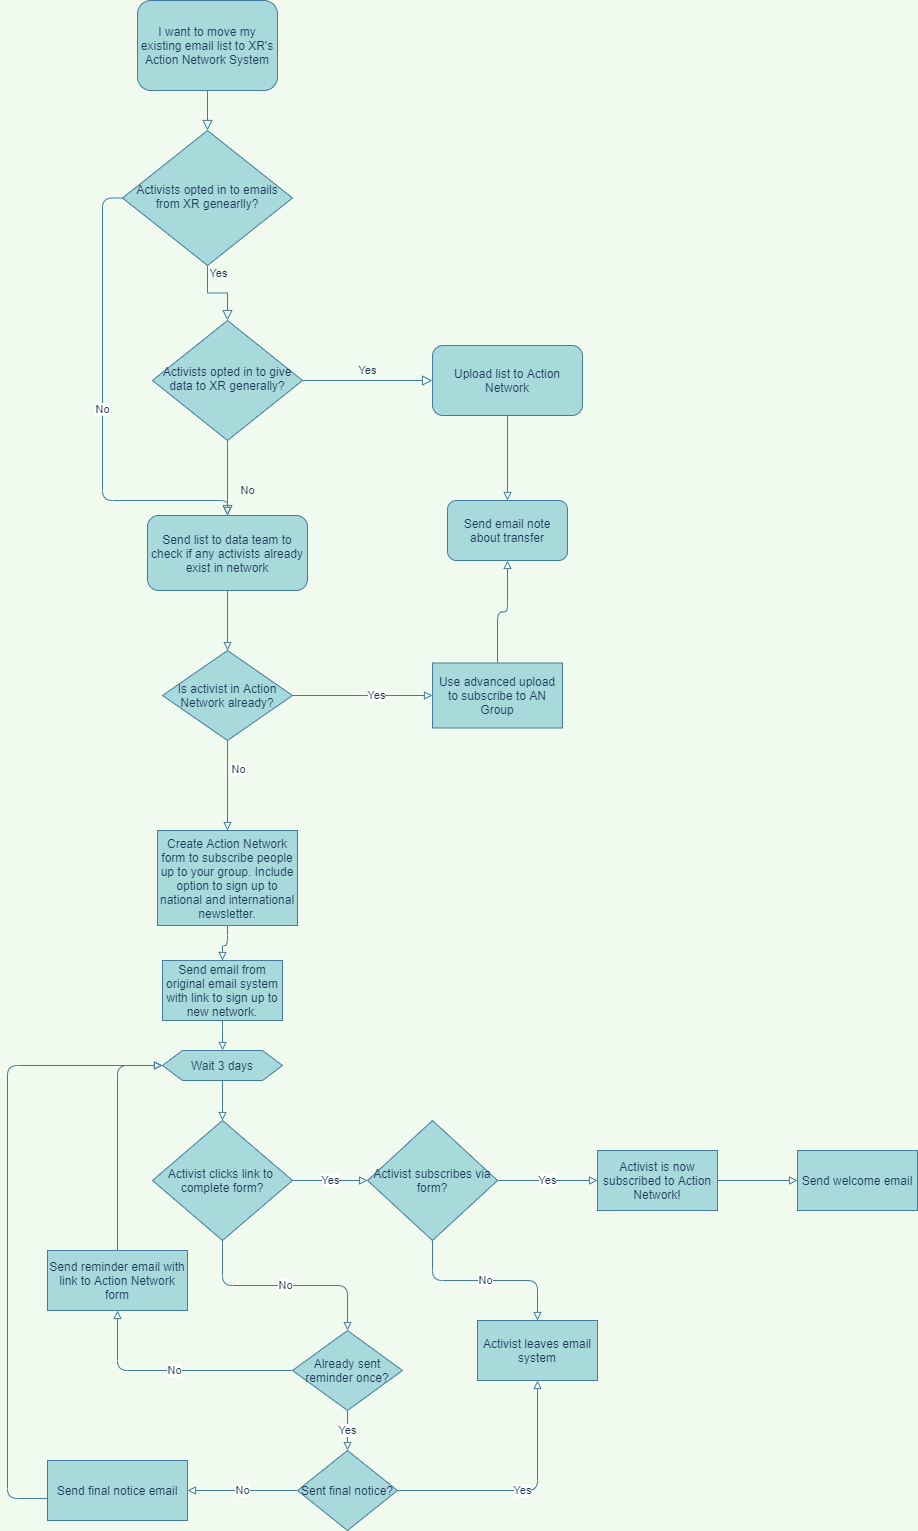 Flowchart describing process for migrating your email list into Action Network